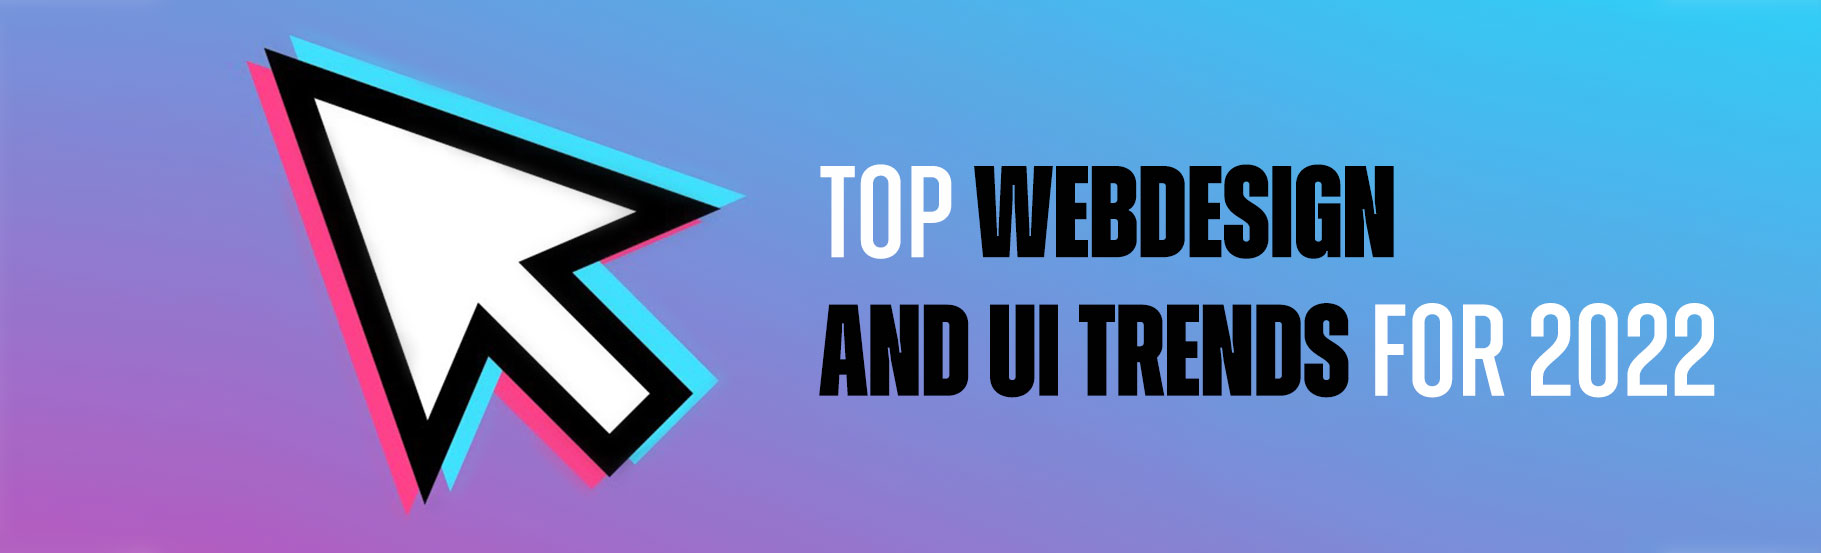 Top webdesign and UI trends for 2022.